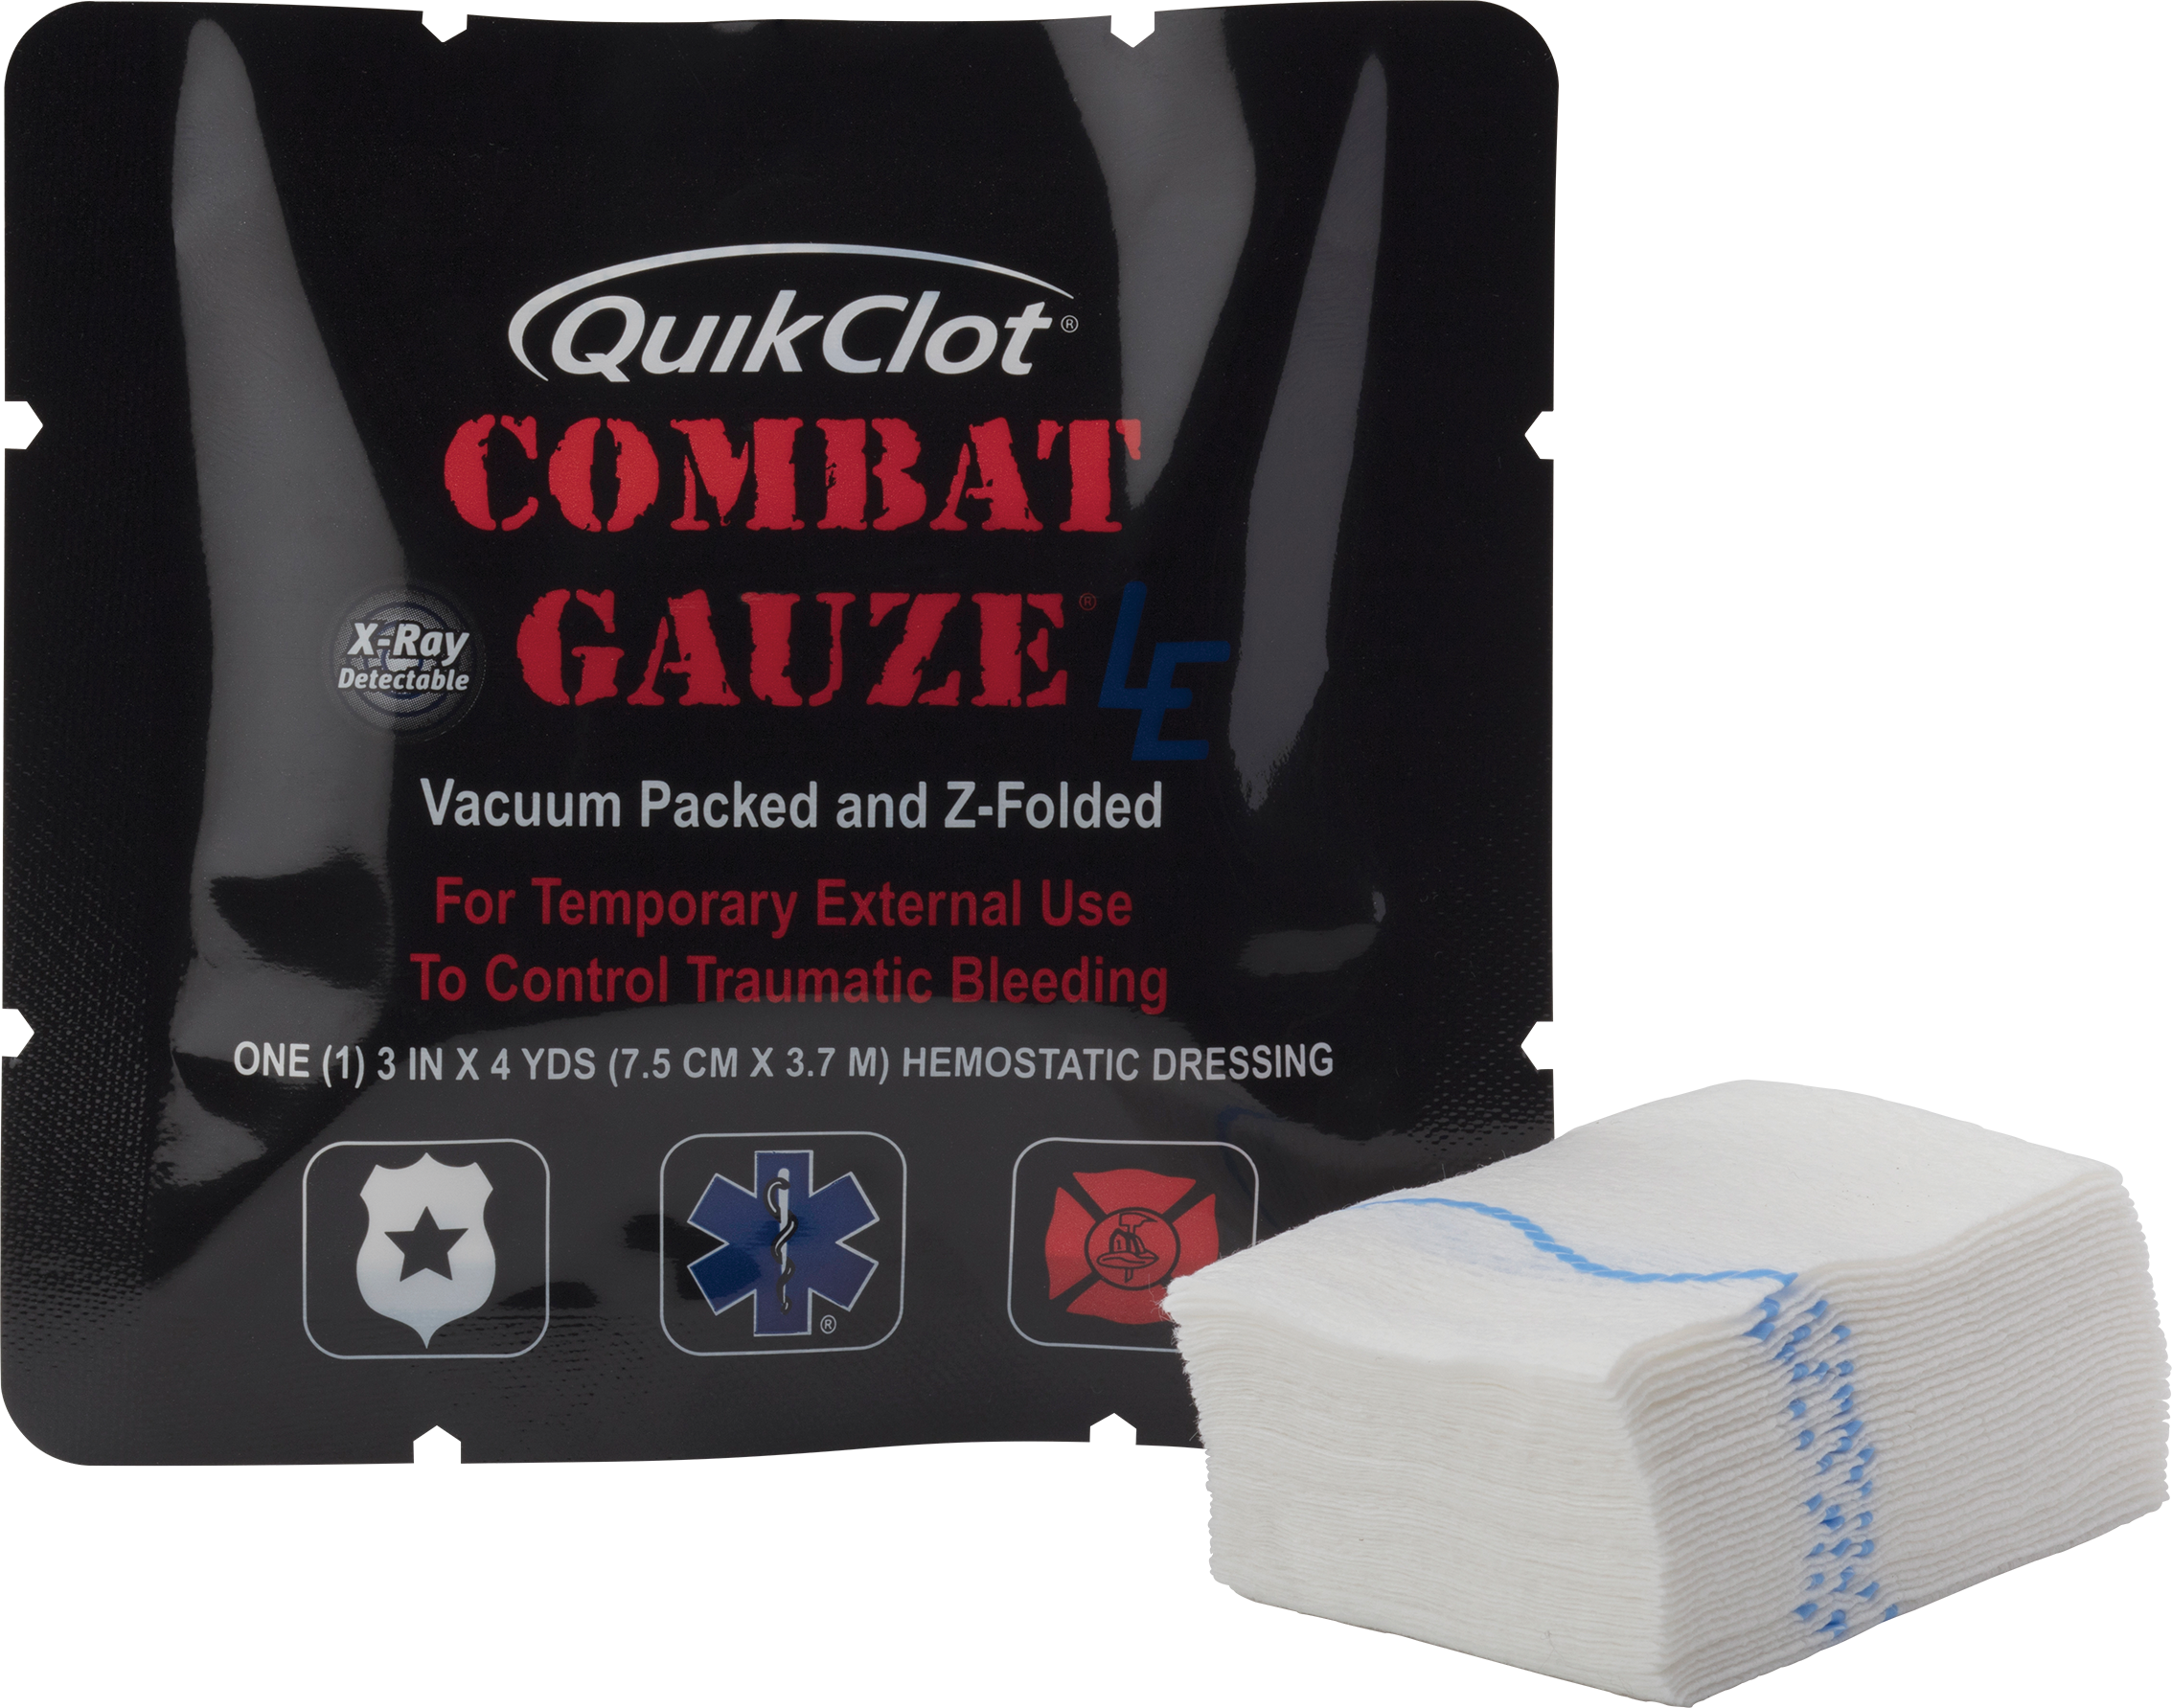 Quikclot Combat Gauze packaging with single bandage out of package